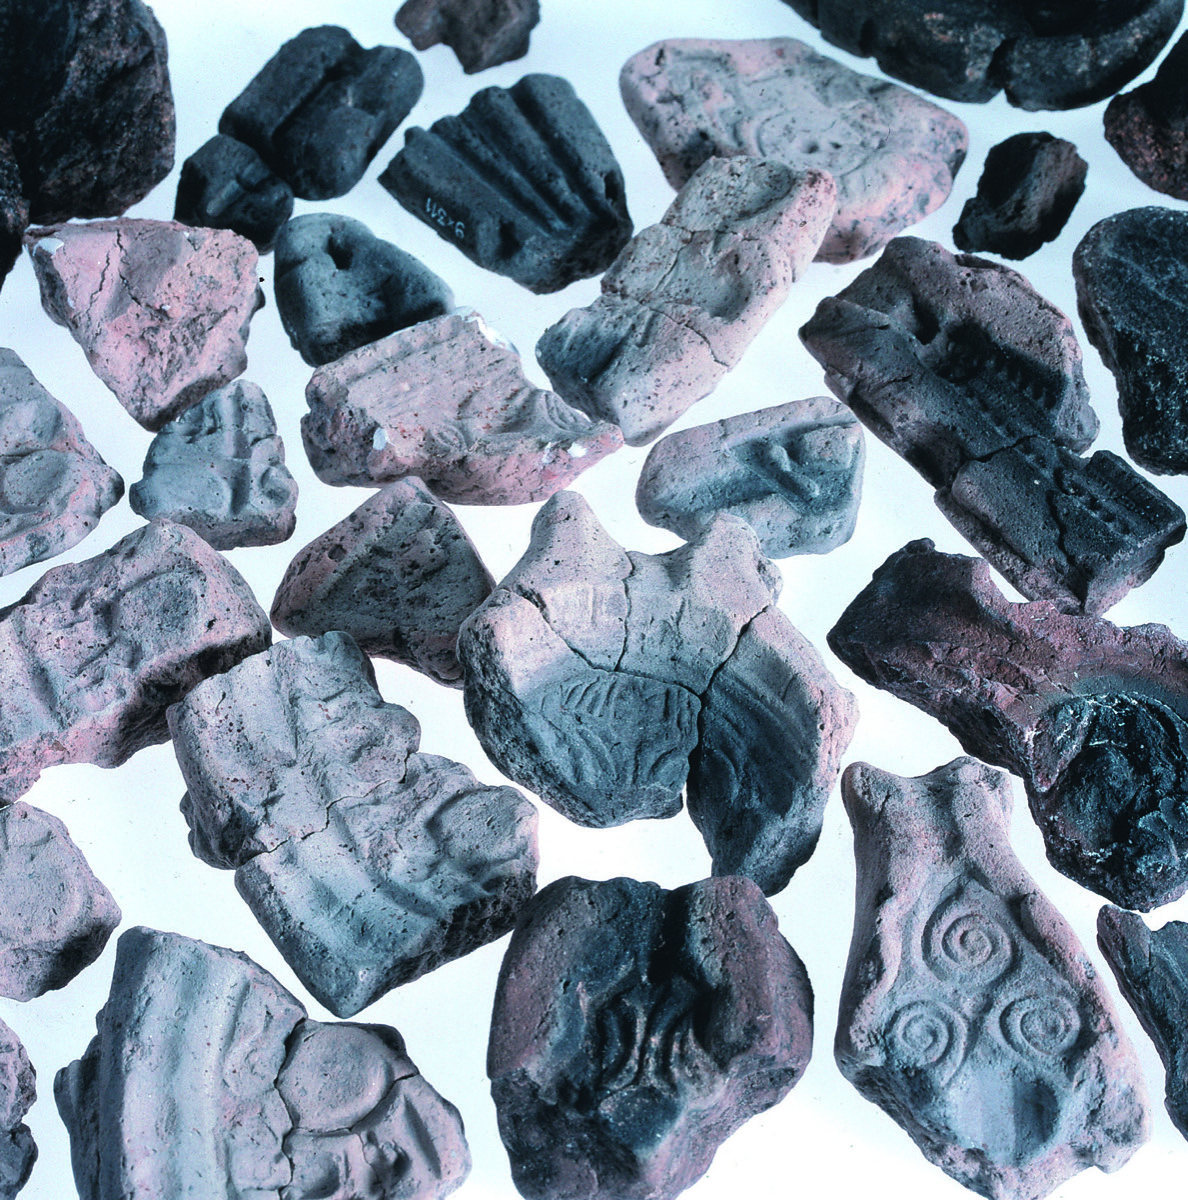 a bunch of gray stone mould fragments. on the surfaces of each, you can make out intricate patterns of the mouldings